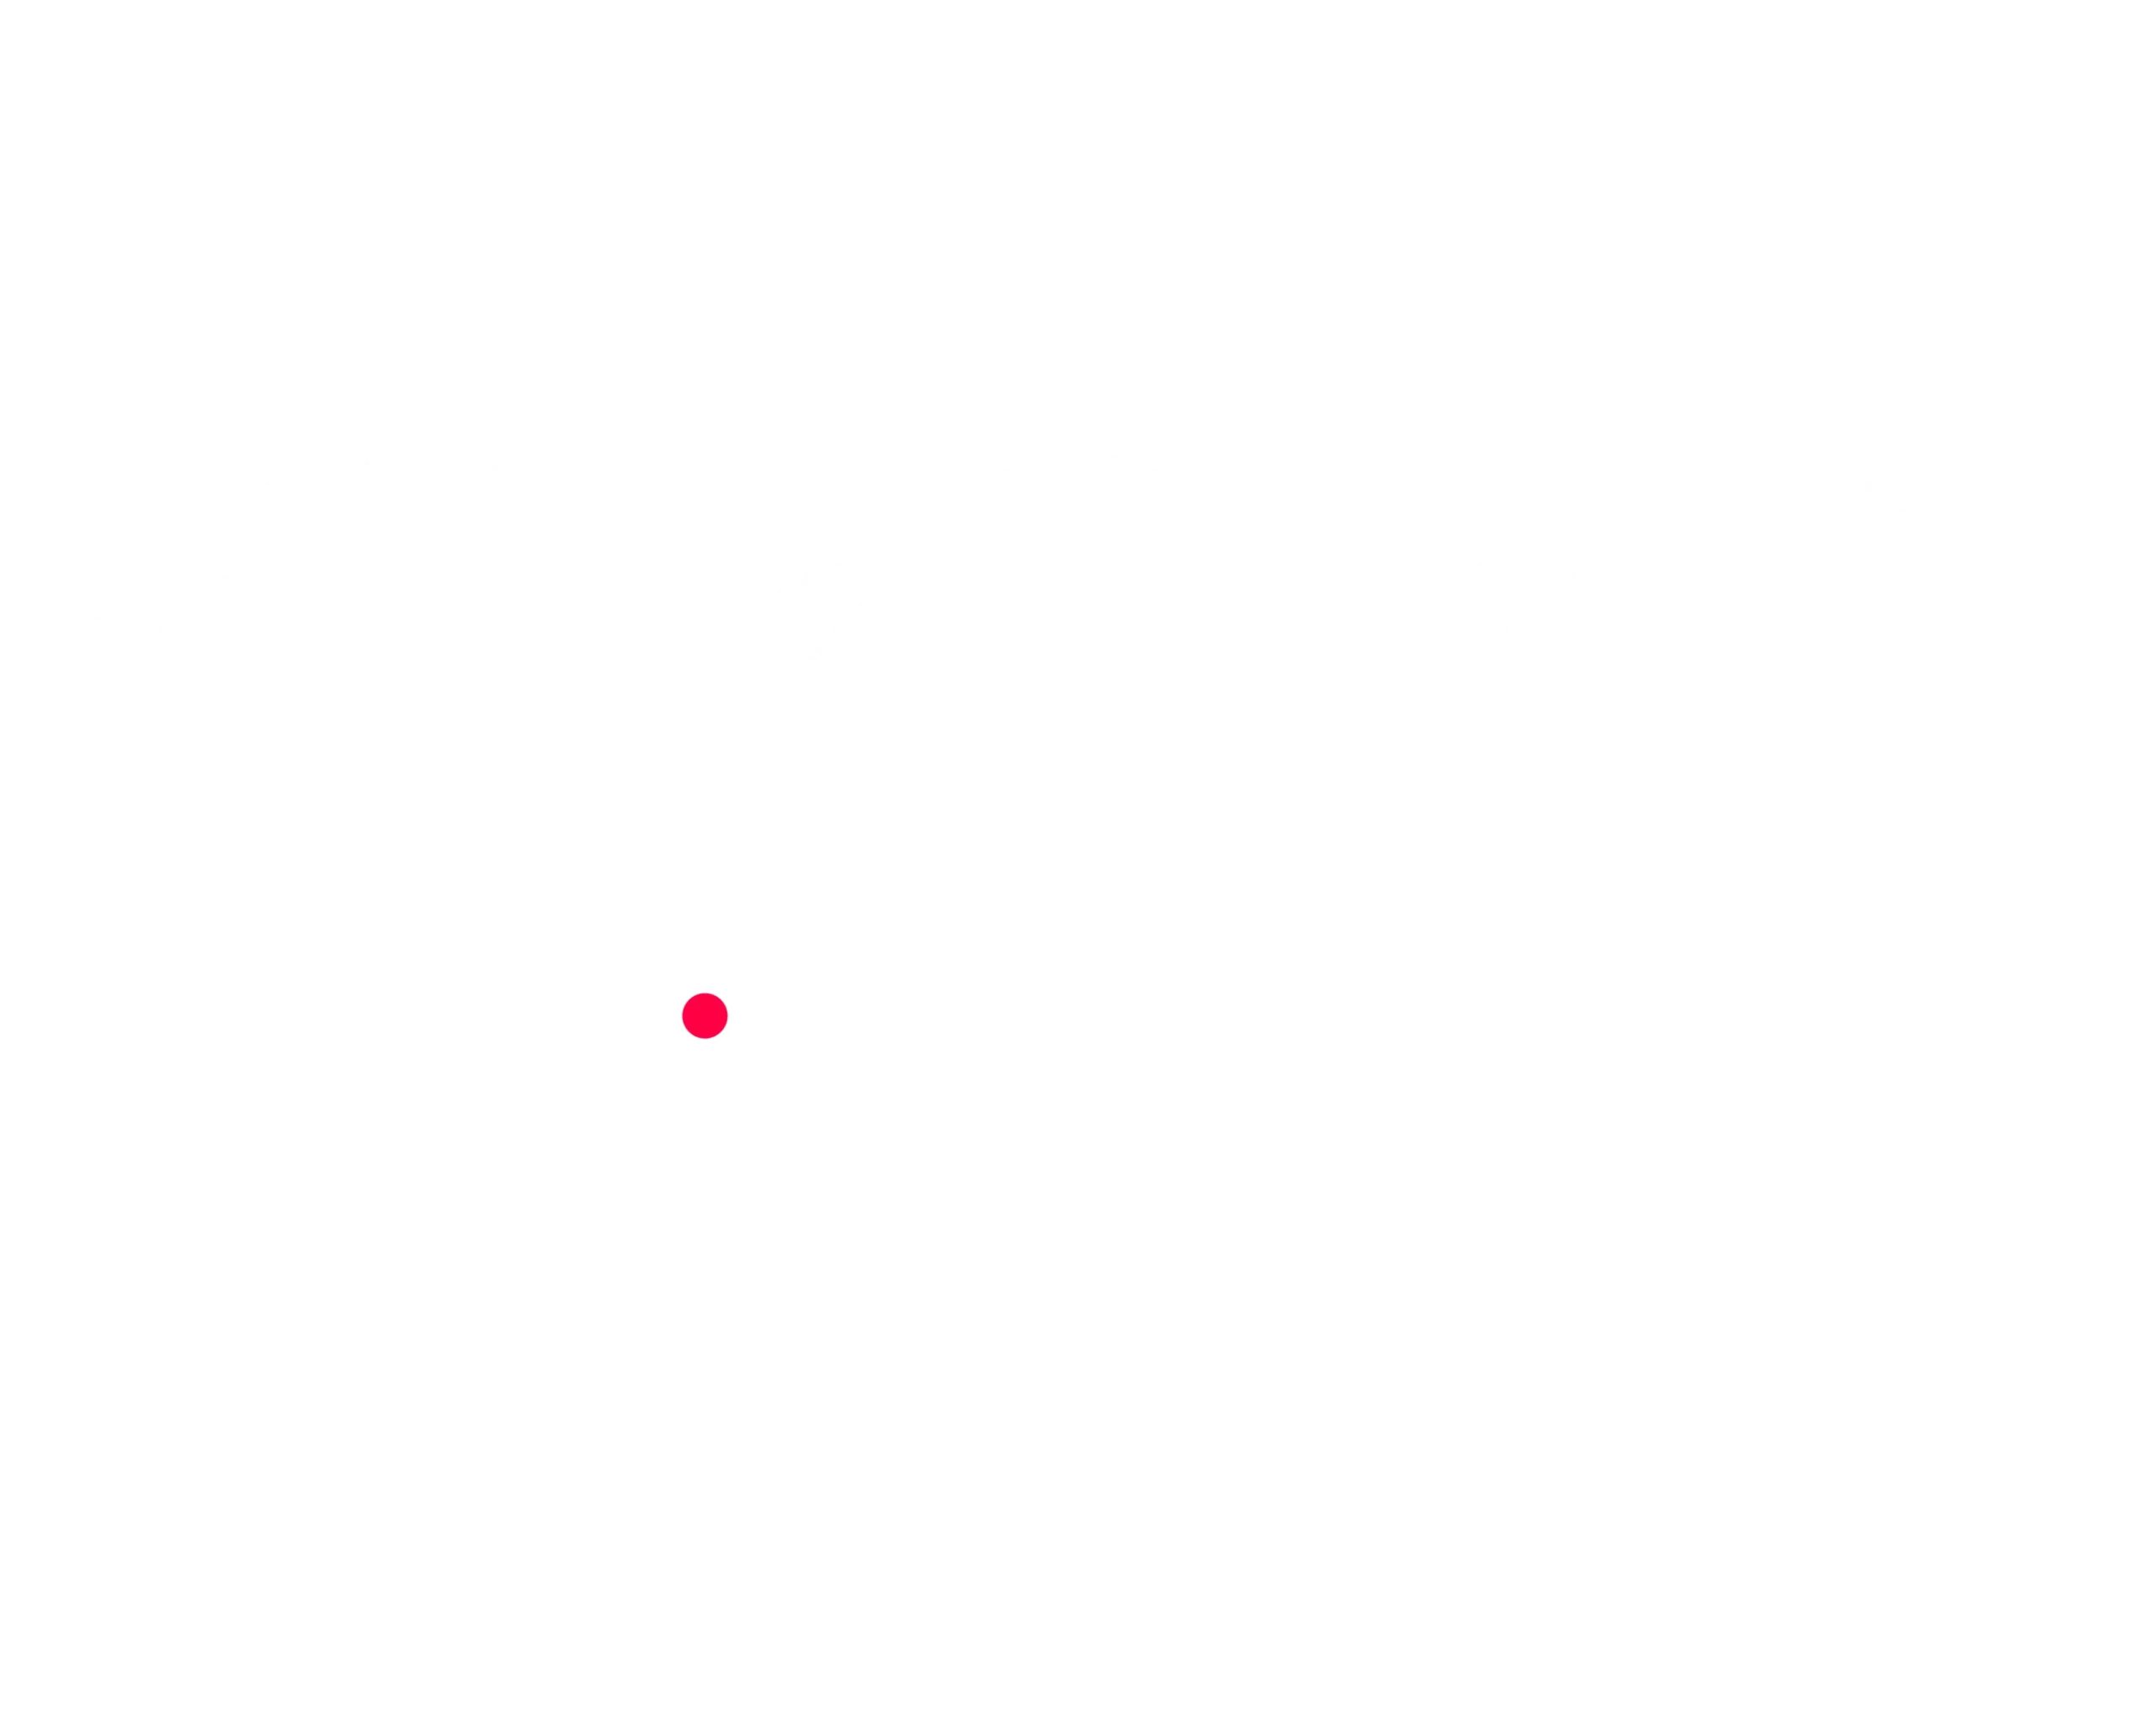 Activation, Selling, Loyalty